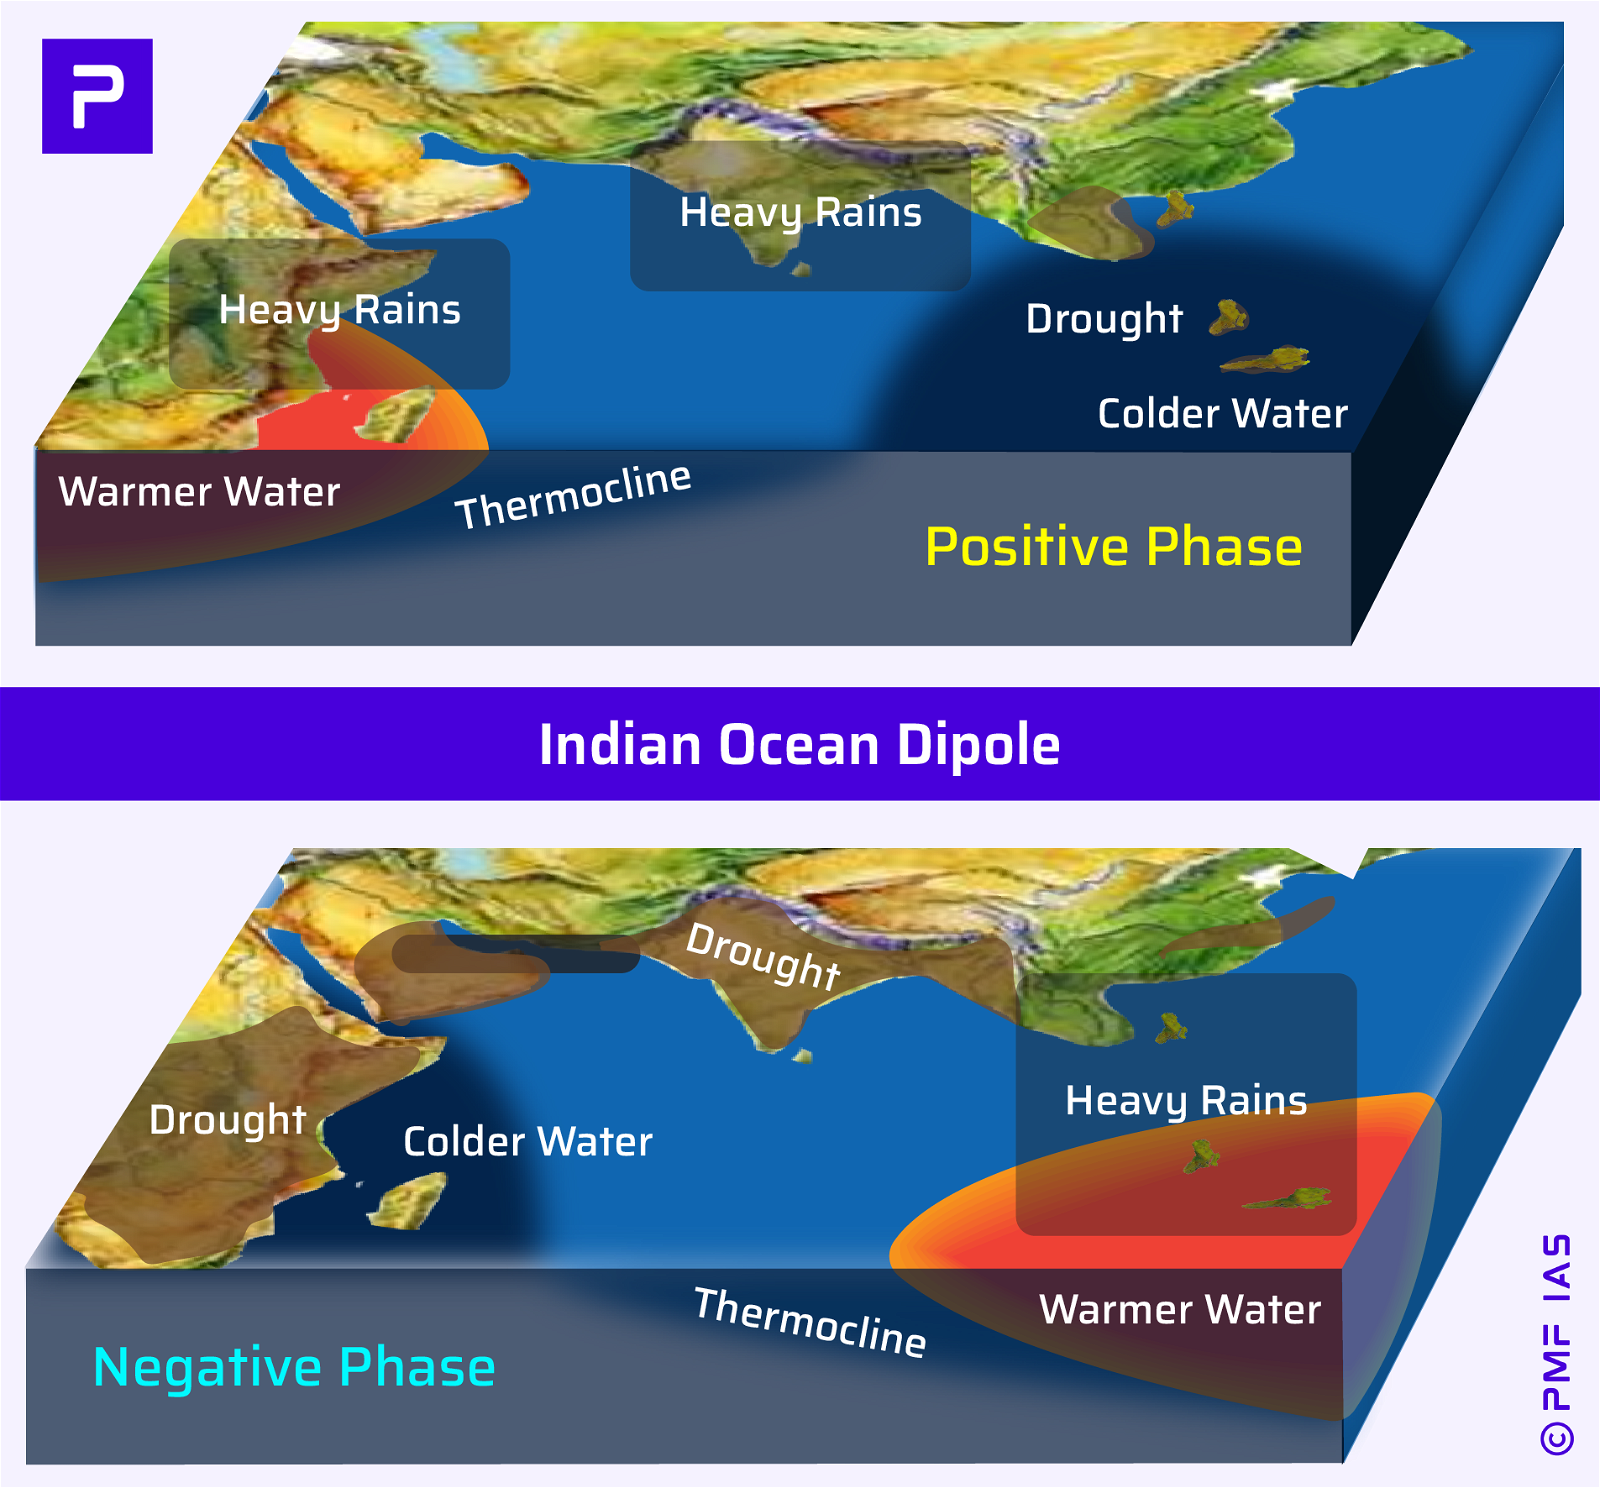 Positive Phase of Indian Dipole and Negative Phase of Indian Ocean Dipole. Description automatically generated